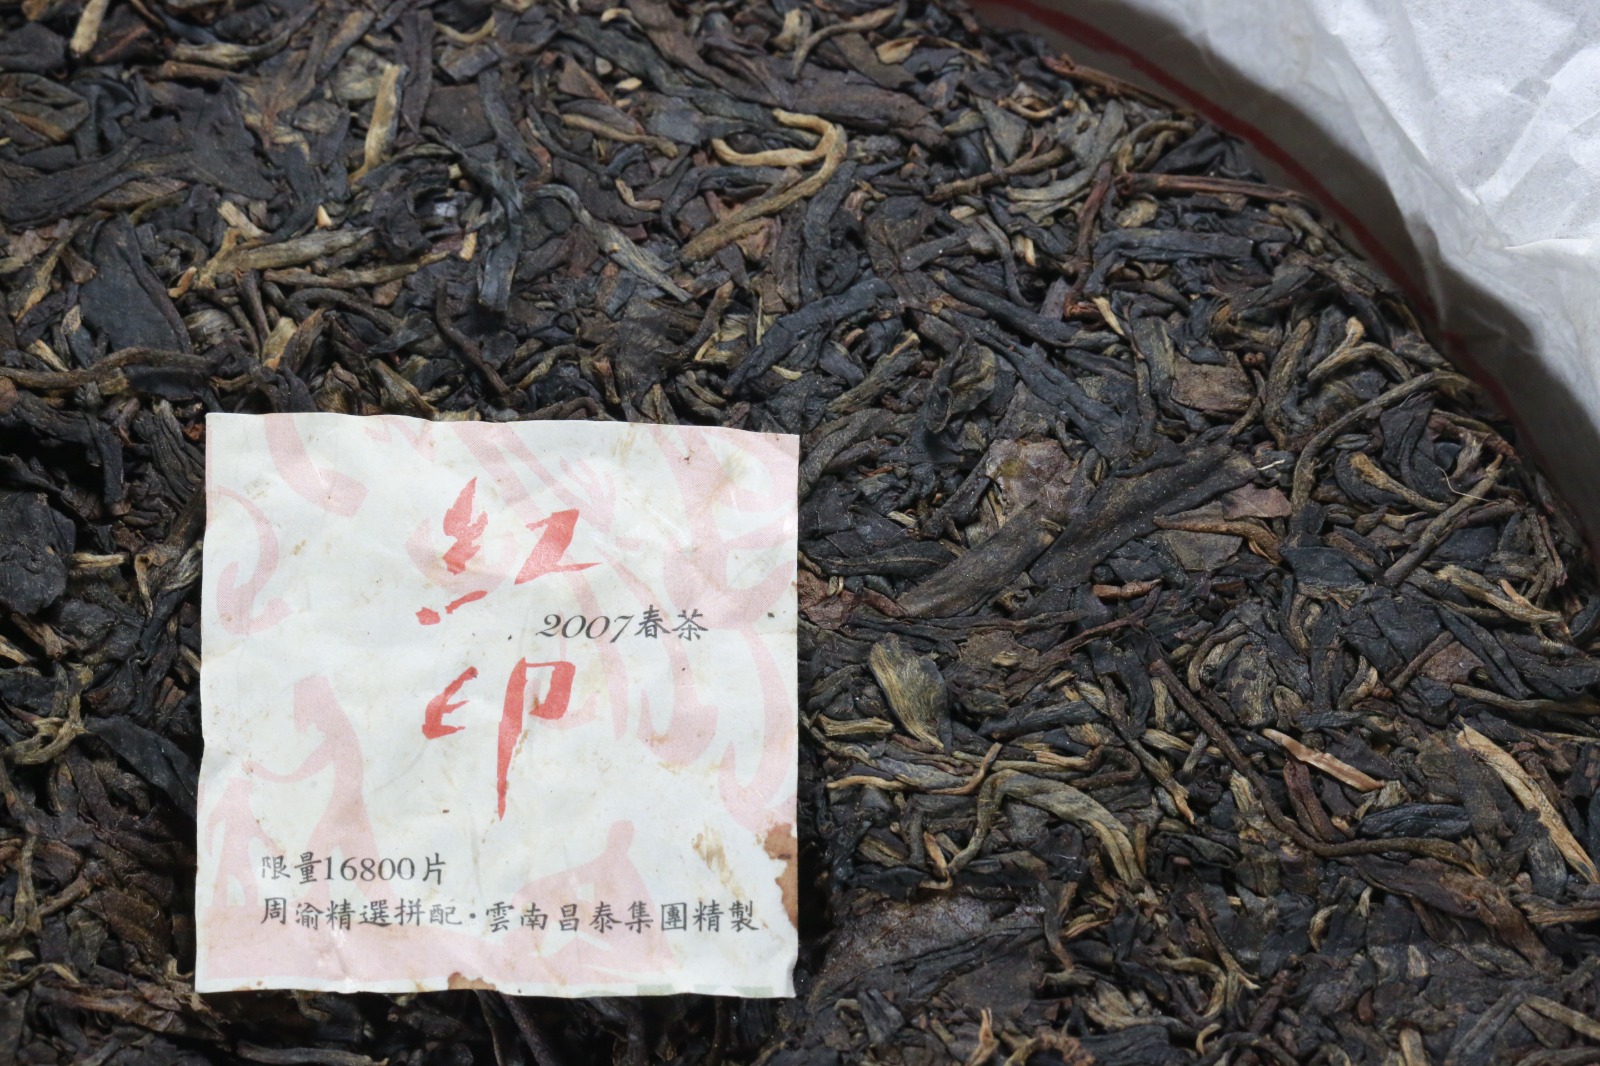 Hong Ying 'Red Seal' Raw Puerh Tea from Wistaria Tea House